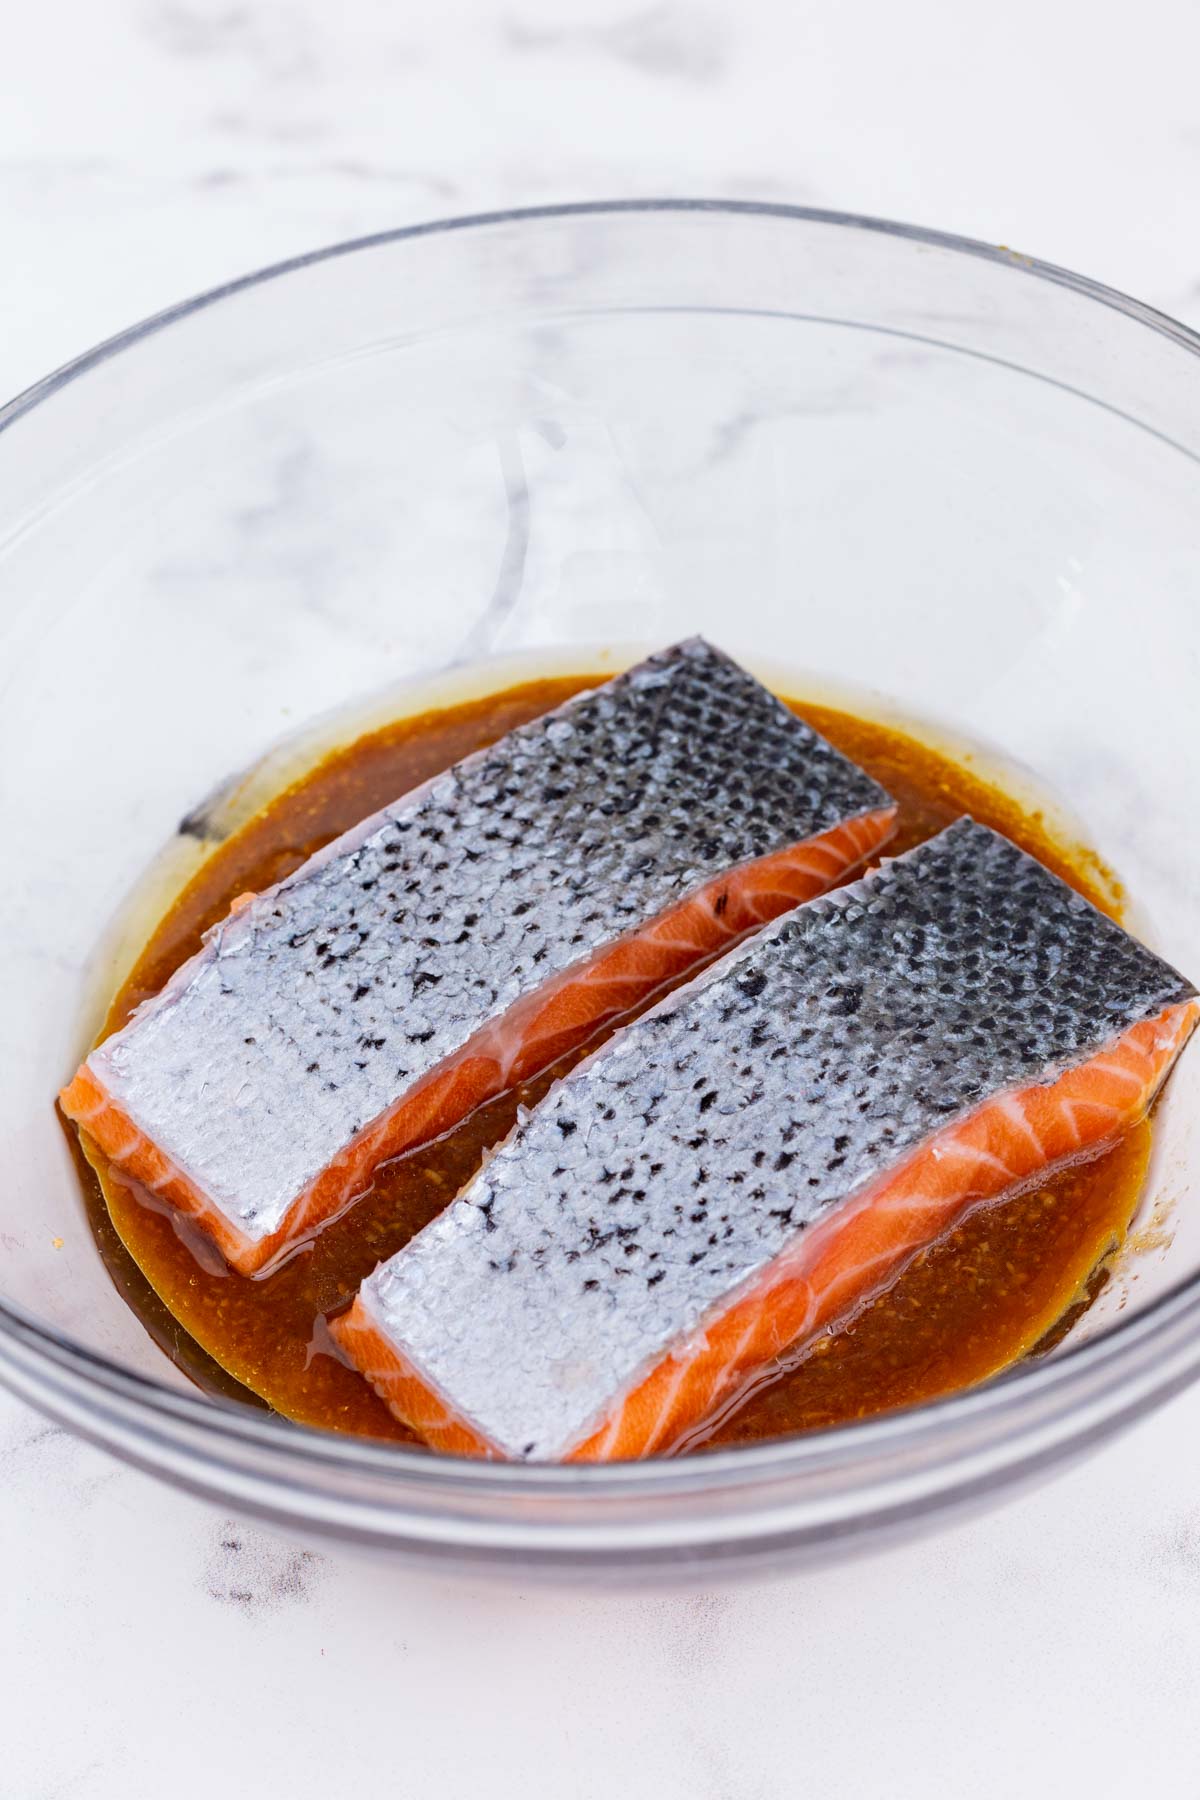 Salmon fillets are marinated in a miso glaze.